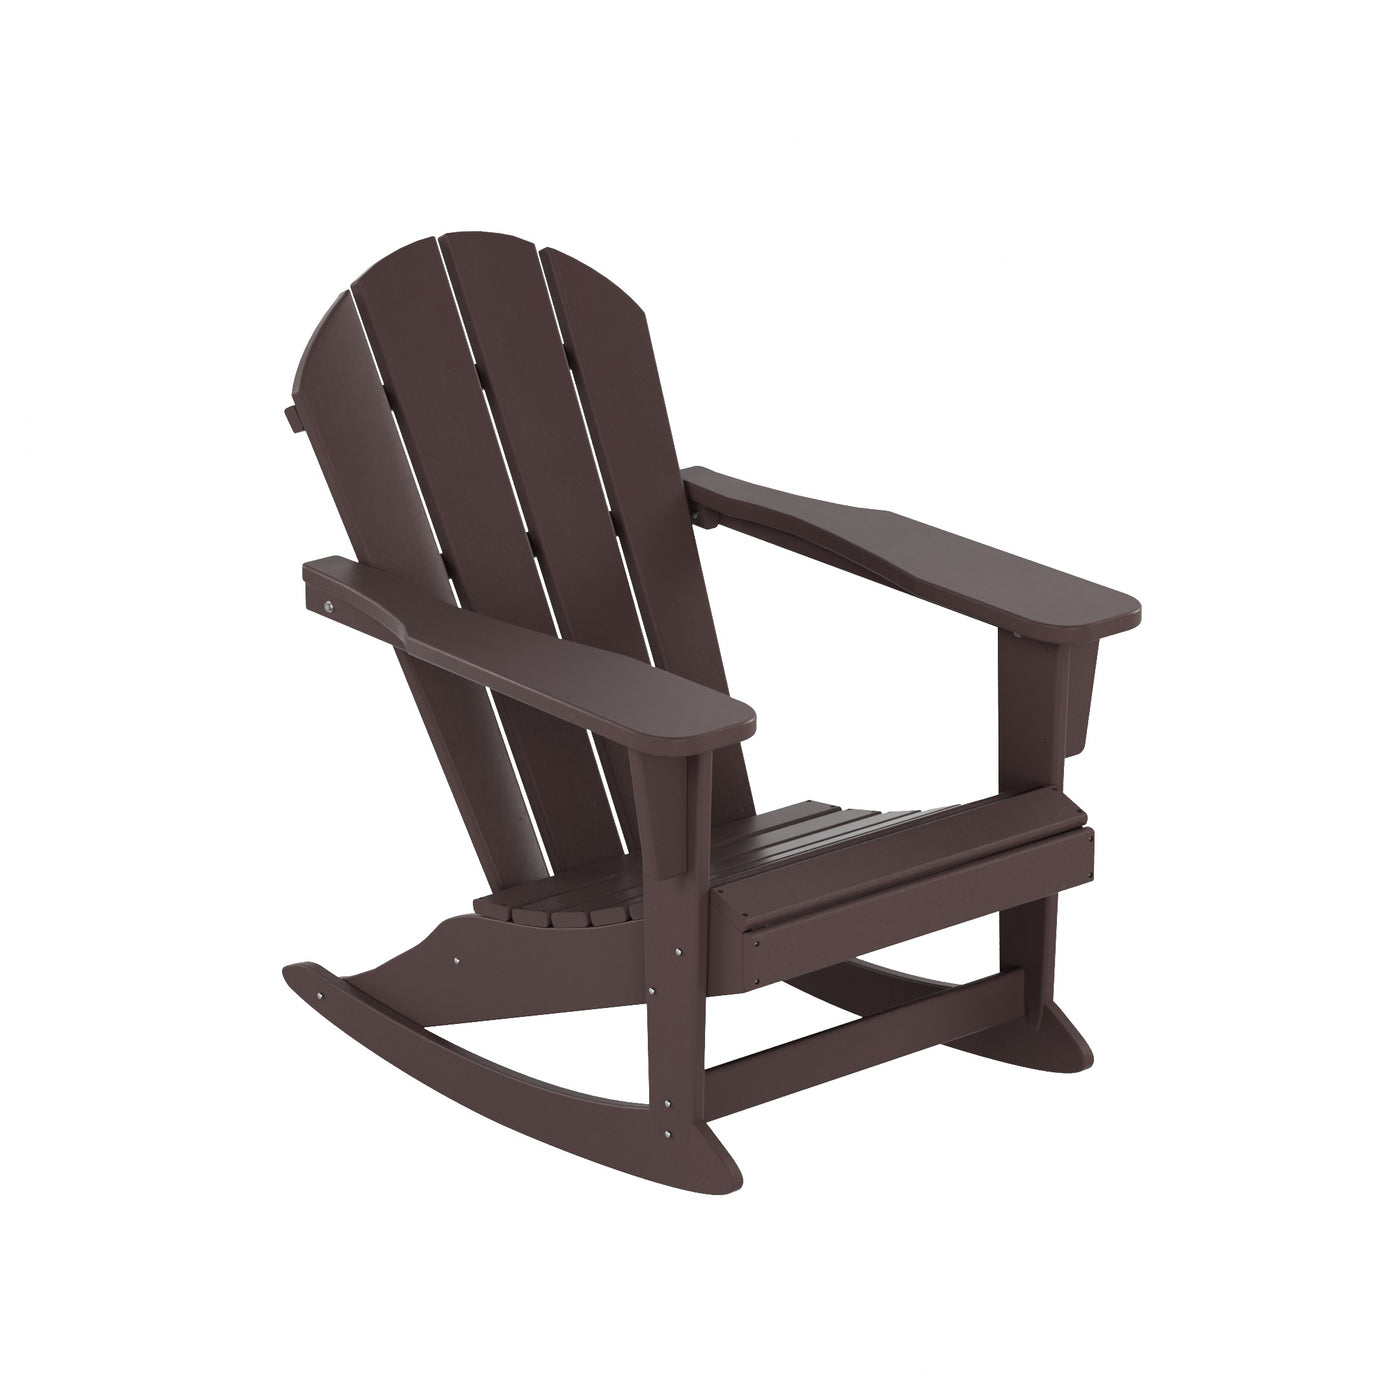 Malibu Outdoor Patio Rocking Adirondack Chairs with Side Table Set